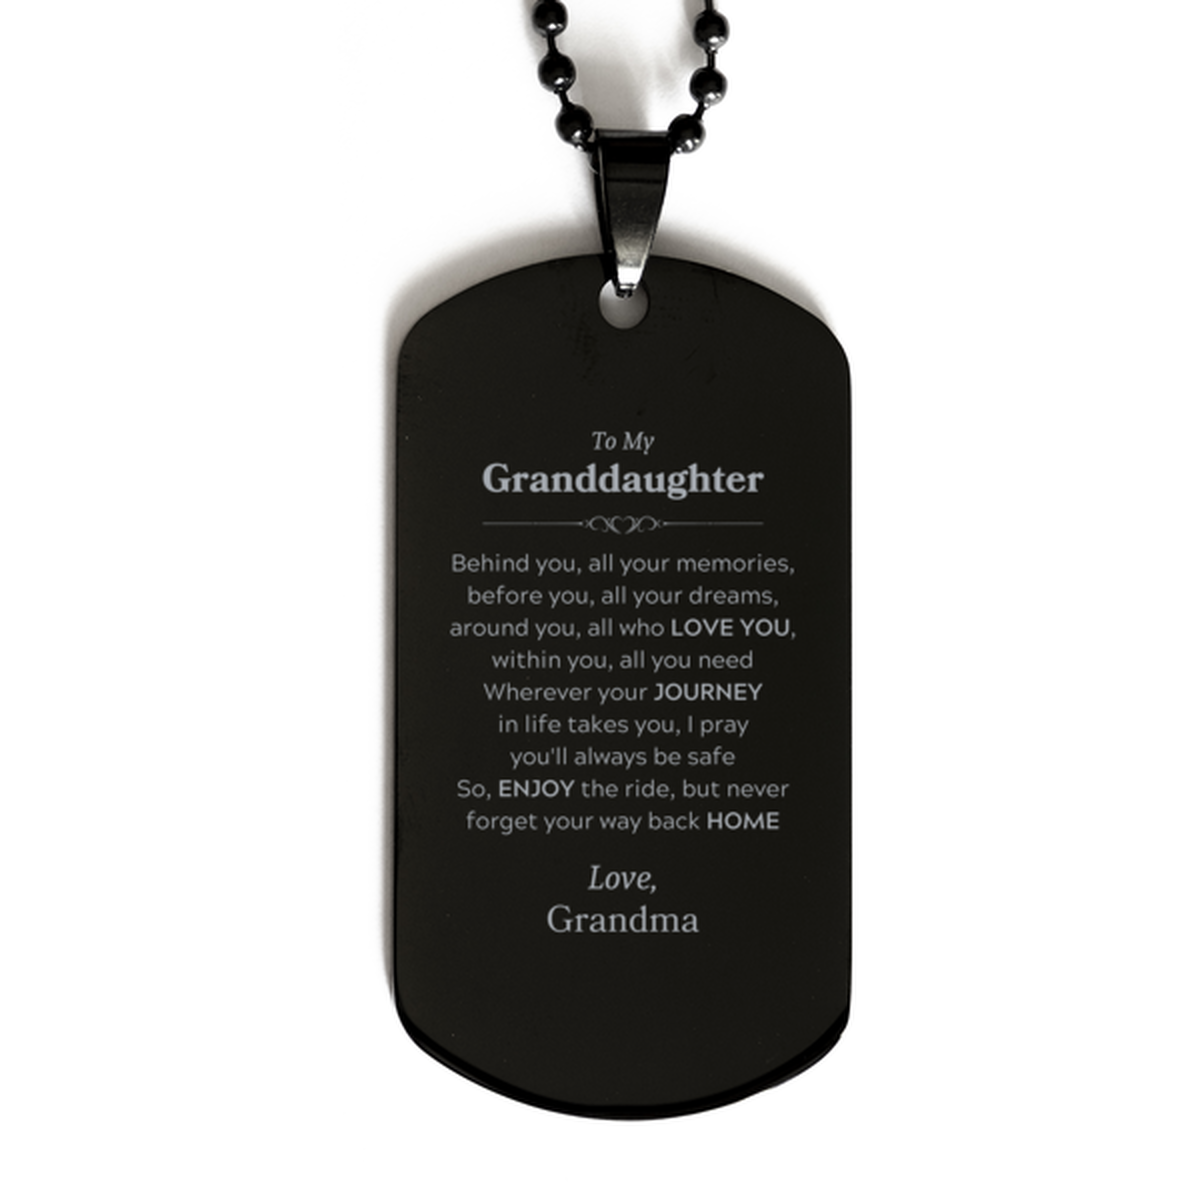 To My Granddaughter Graduation Gifts from Grandma, Granddaughter Black Dog Tag Christmas Birthday Gifts for Granddaughter Behind you, all your memories, before you, all your dreams. Love, Grandma